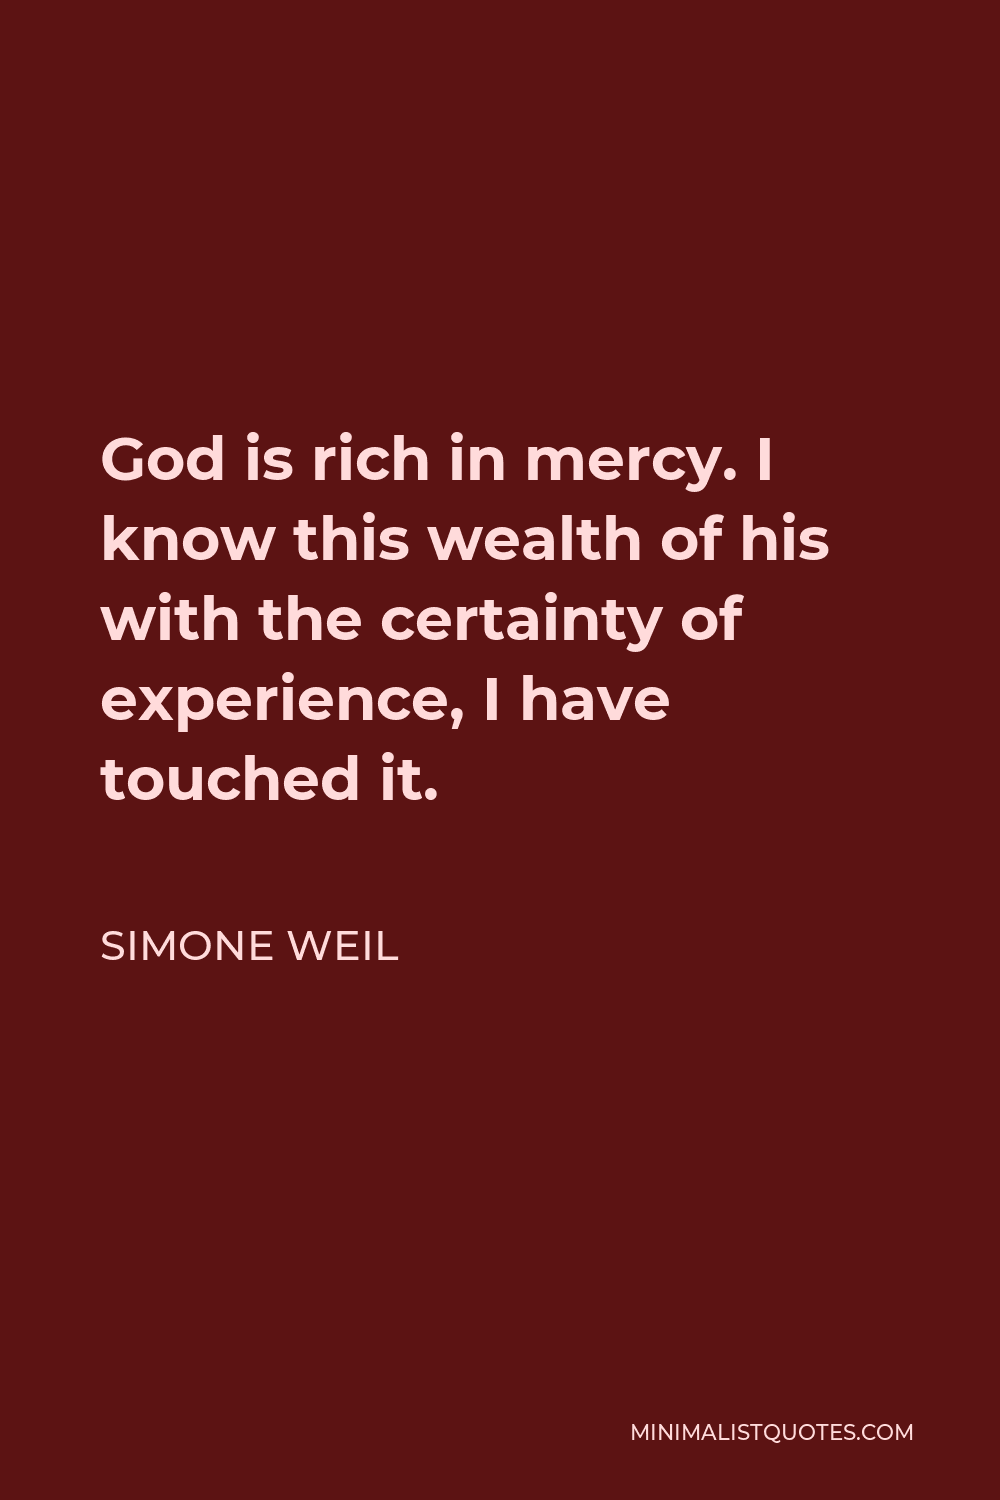 Simone Weil Quote - God is rich in mercy. I know this wealth of his with the certainty of experience, I have touched it.